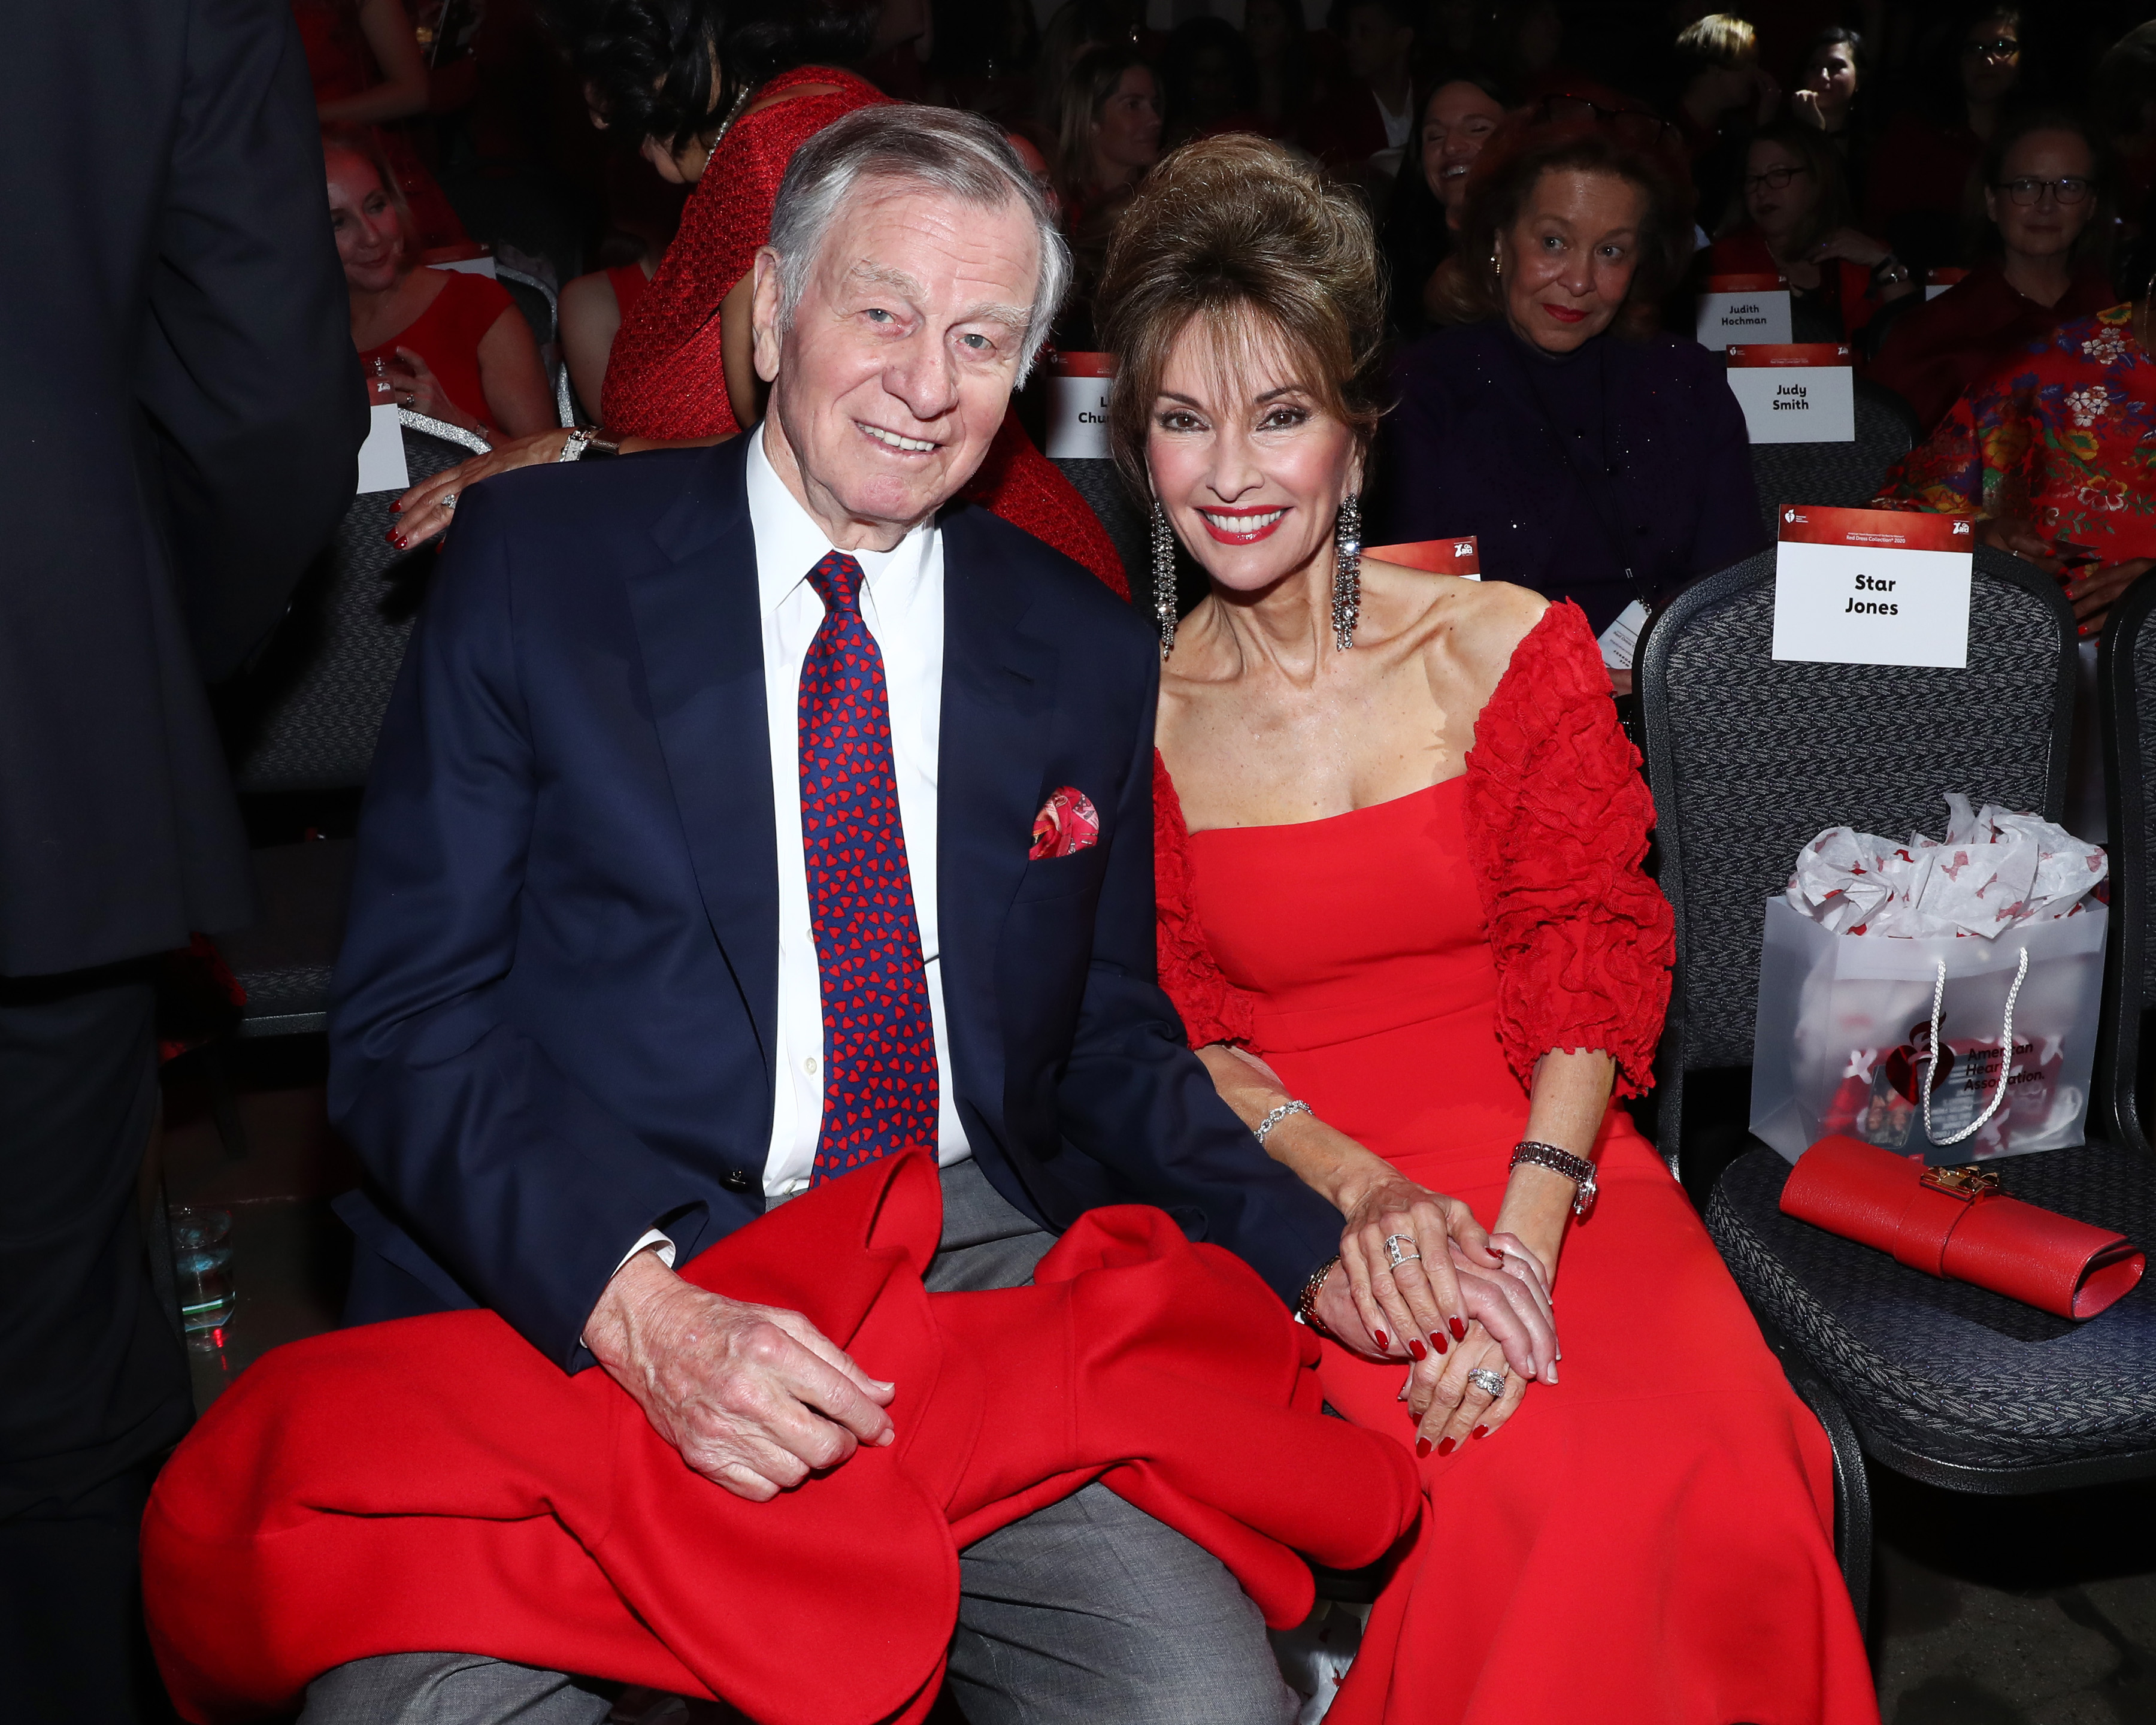 Helmut Huber and Susan Lucci at The American Heart Association's Go Red for Women Red Dress Collection 2020 in New York City on February 05, 2020 | Source: Getty Images